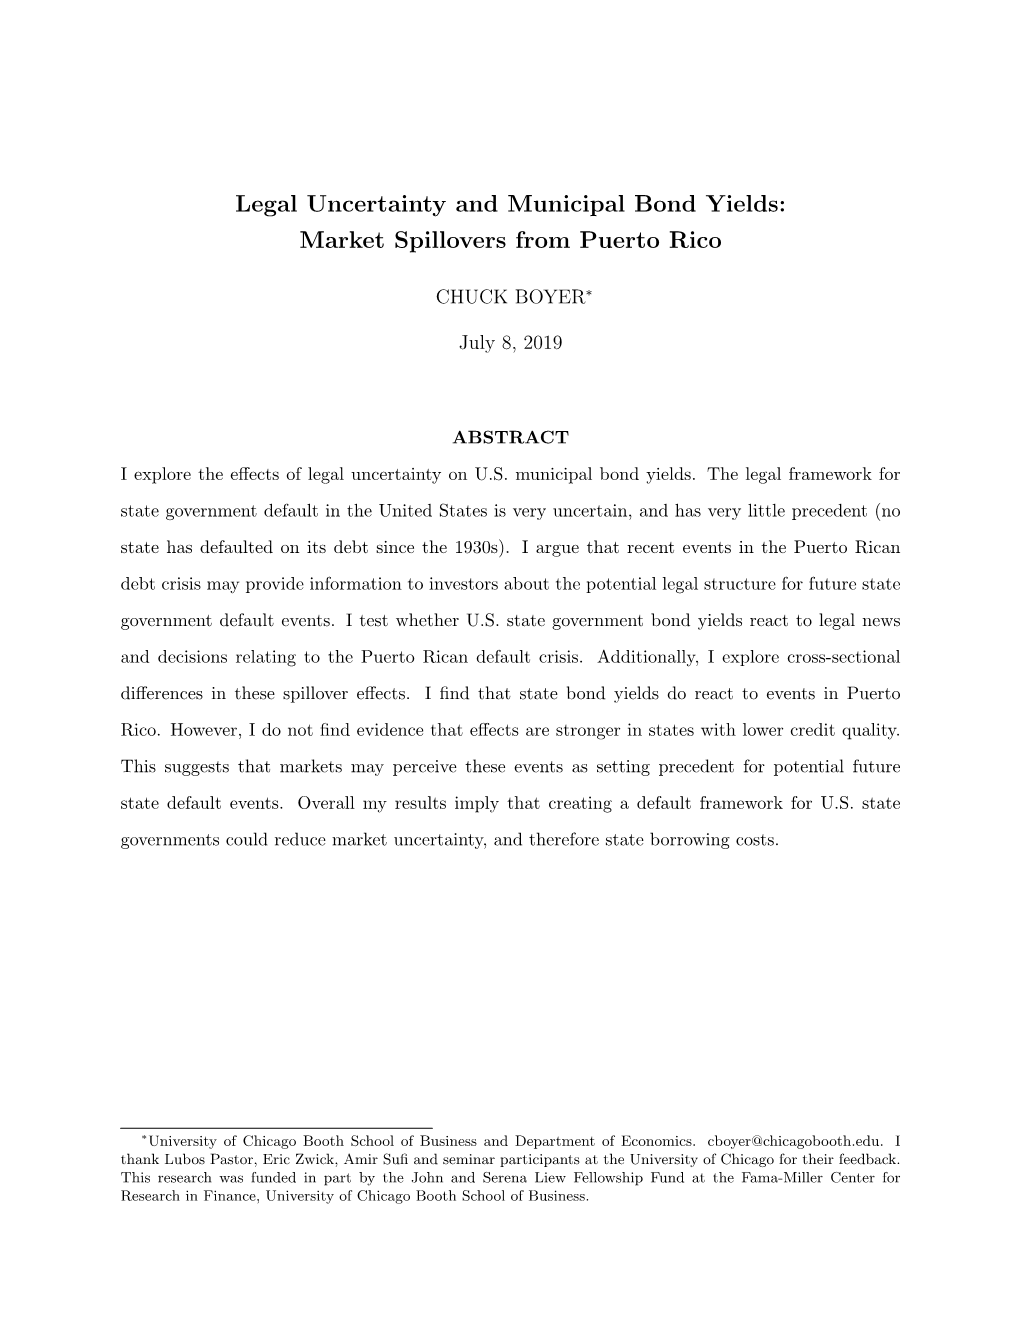 Legal Uncertainty and Municipal Bond Yields: Market Spillovers from Puerto Rico